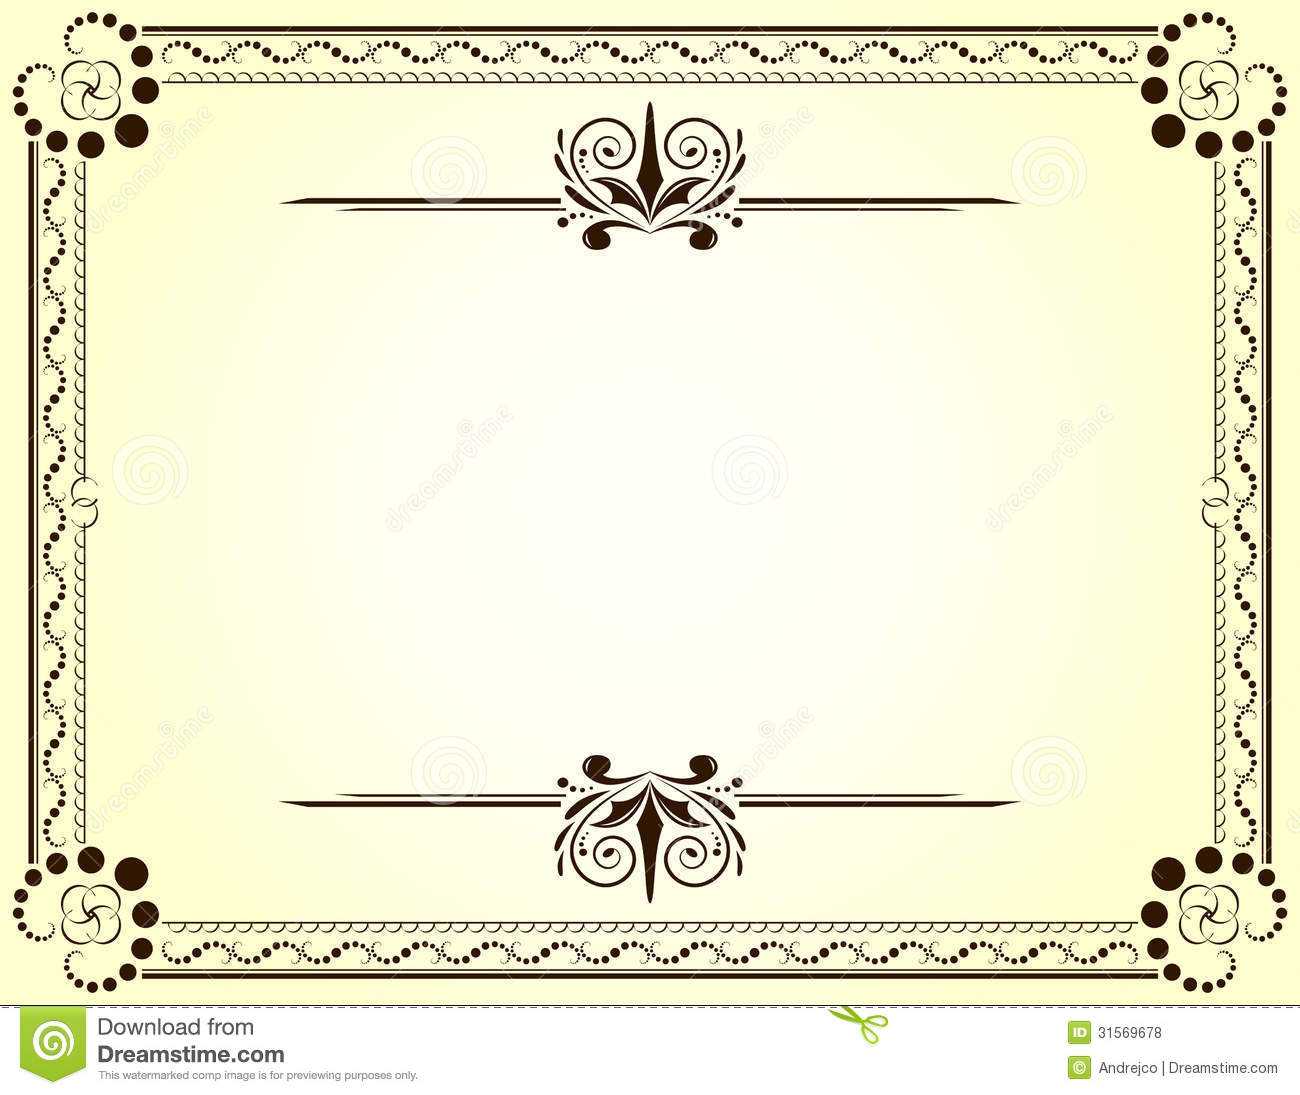 Certificate Stock Vector. Illustration Of Vignette, Frame With Regard To Blank Certificate Templates Free Download